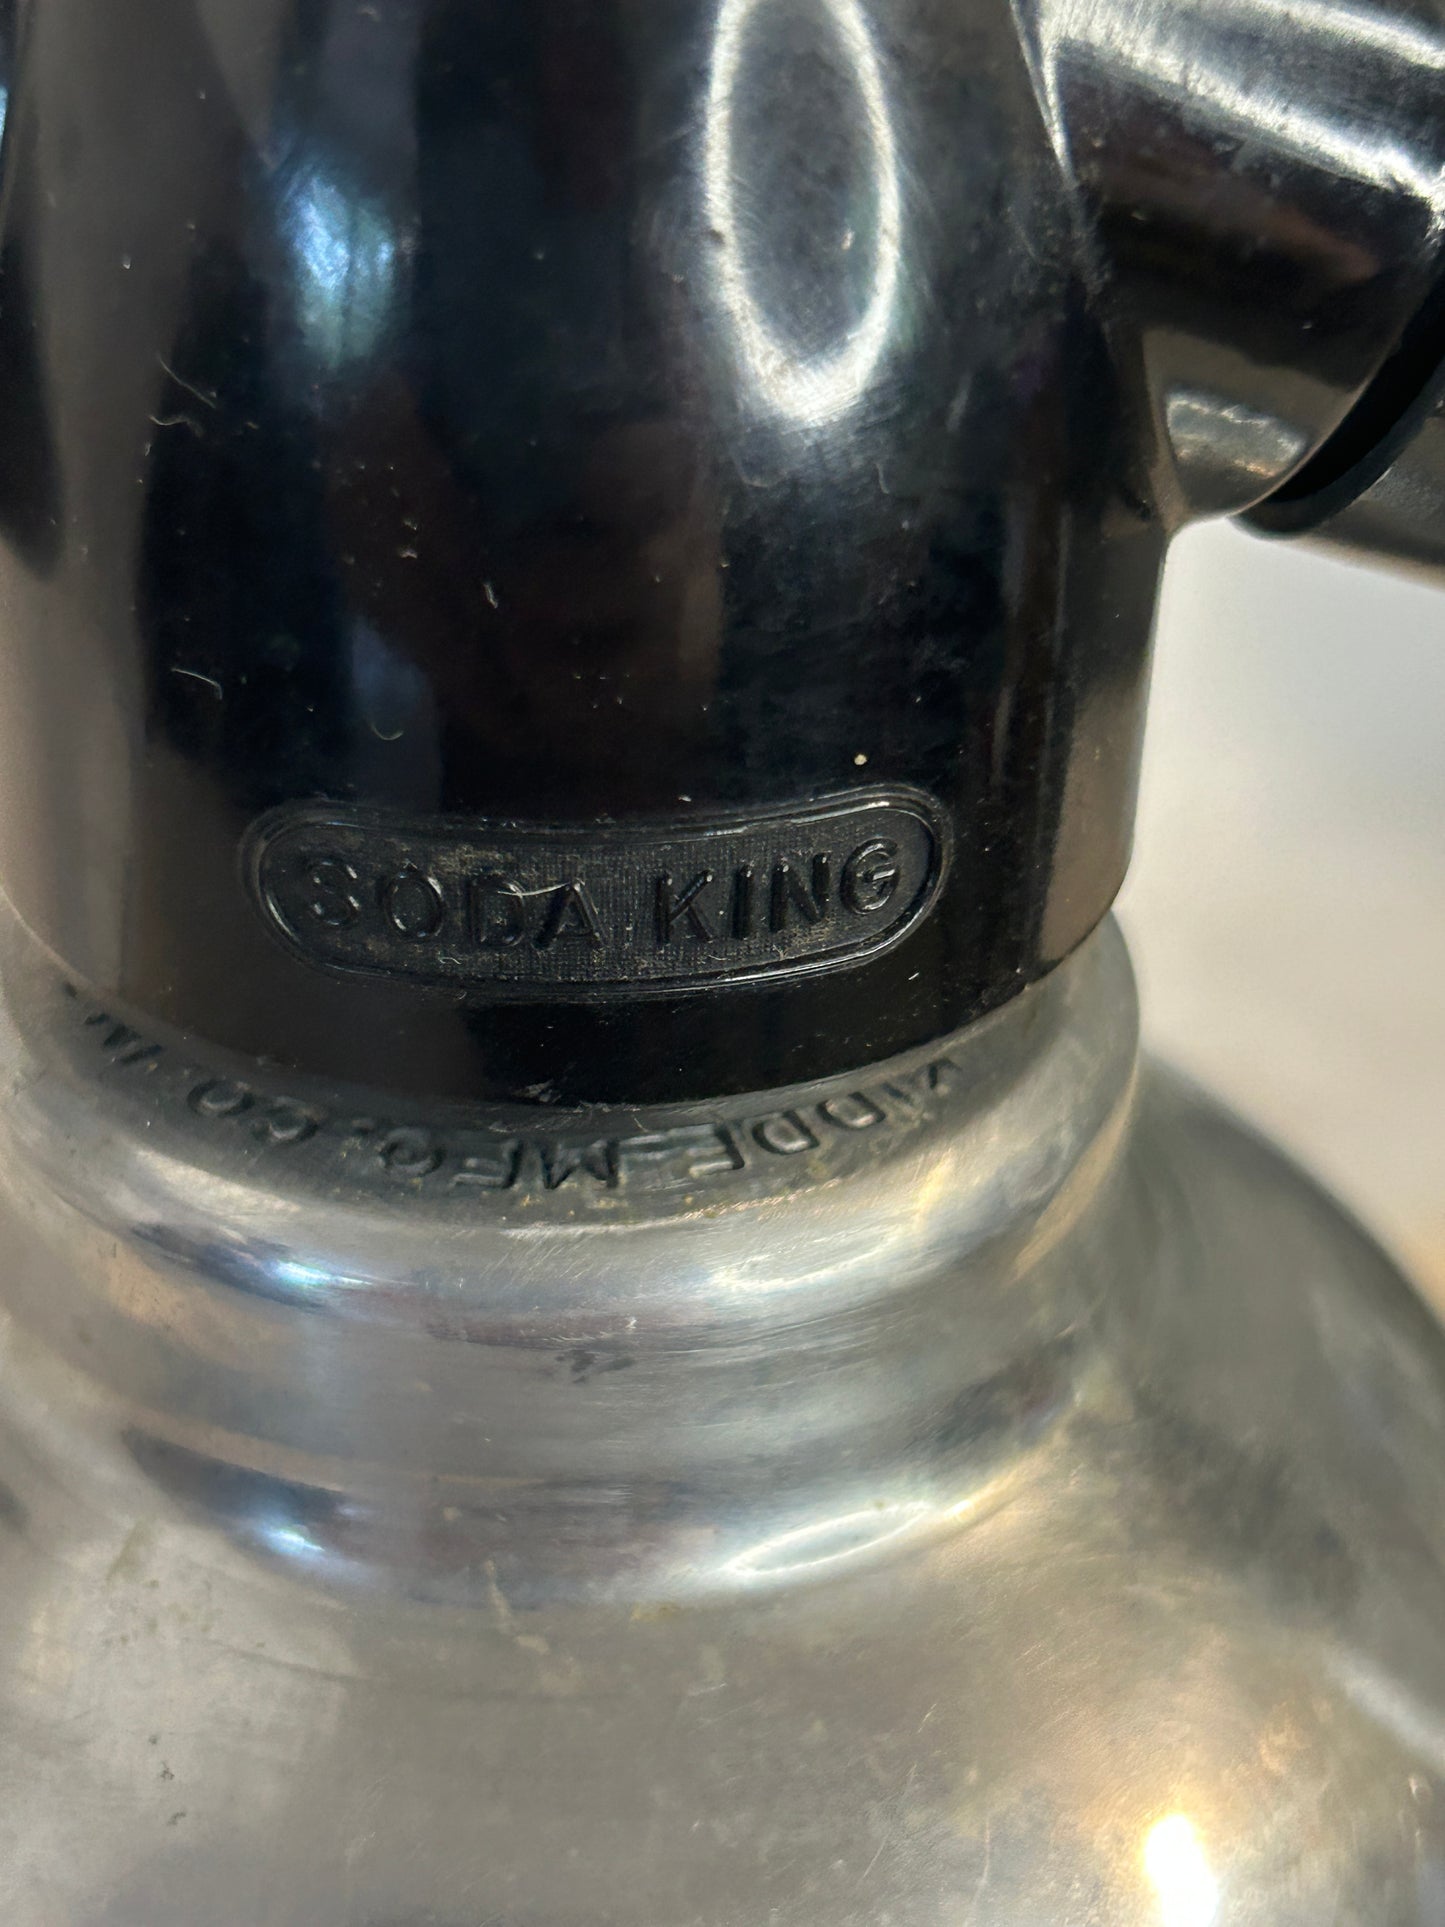 Vintage 1950s American Soda King Chrome and Glass Siphon Seltzer Water Bottle